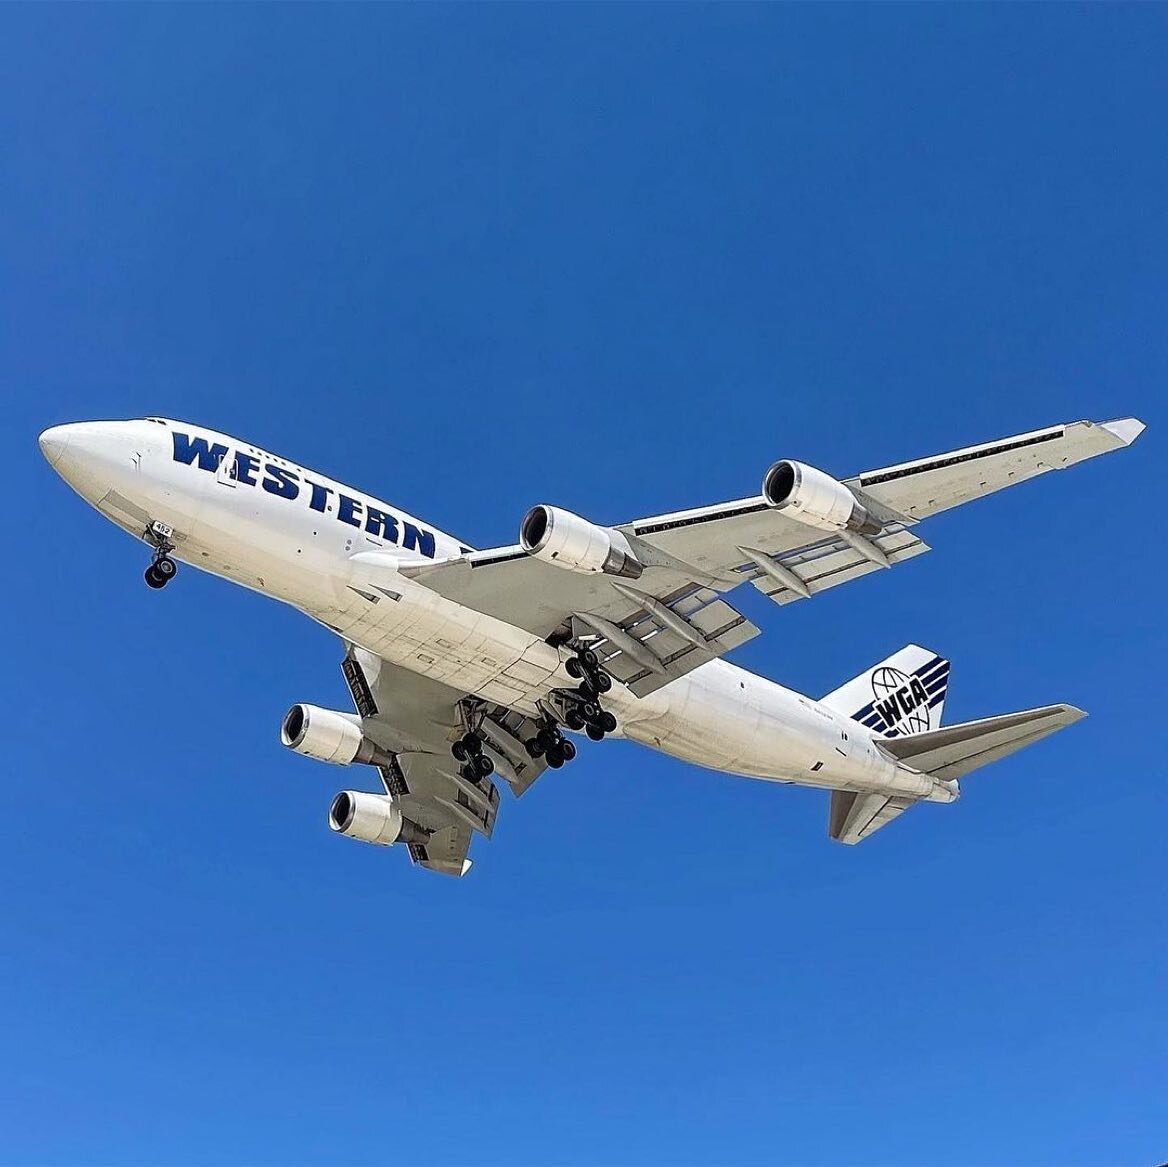 Repost from @techroach98
&bull;
A Western Global Airlines 747-400BDSF landing in Huntsville; the only one in their fleet.
#avgeek #westernglobalairlines #aviationphotography #aviation #boeing747 #aircargo #planespotting #aviationgeek #alwayslookingup